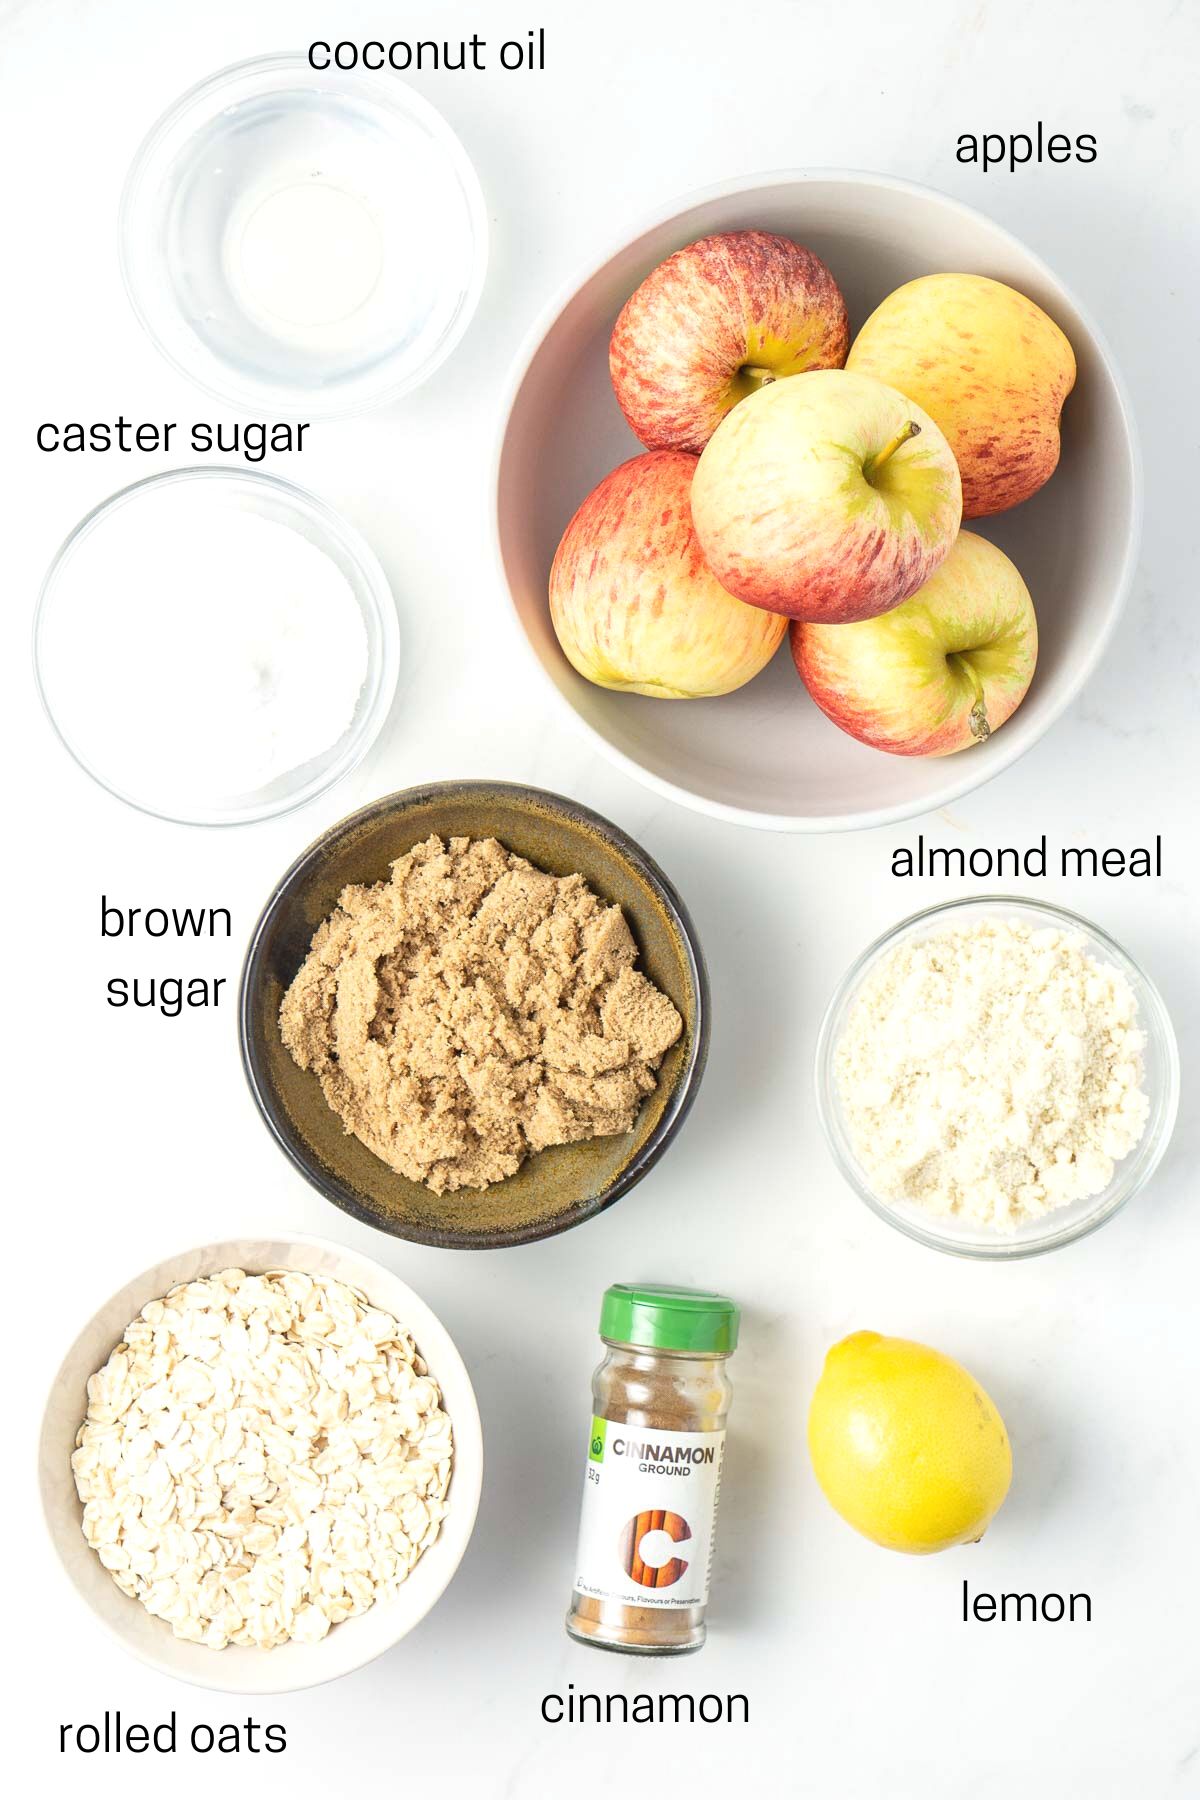 All ingredients needed to make vegan apple crumble laid out in small bowls.